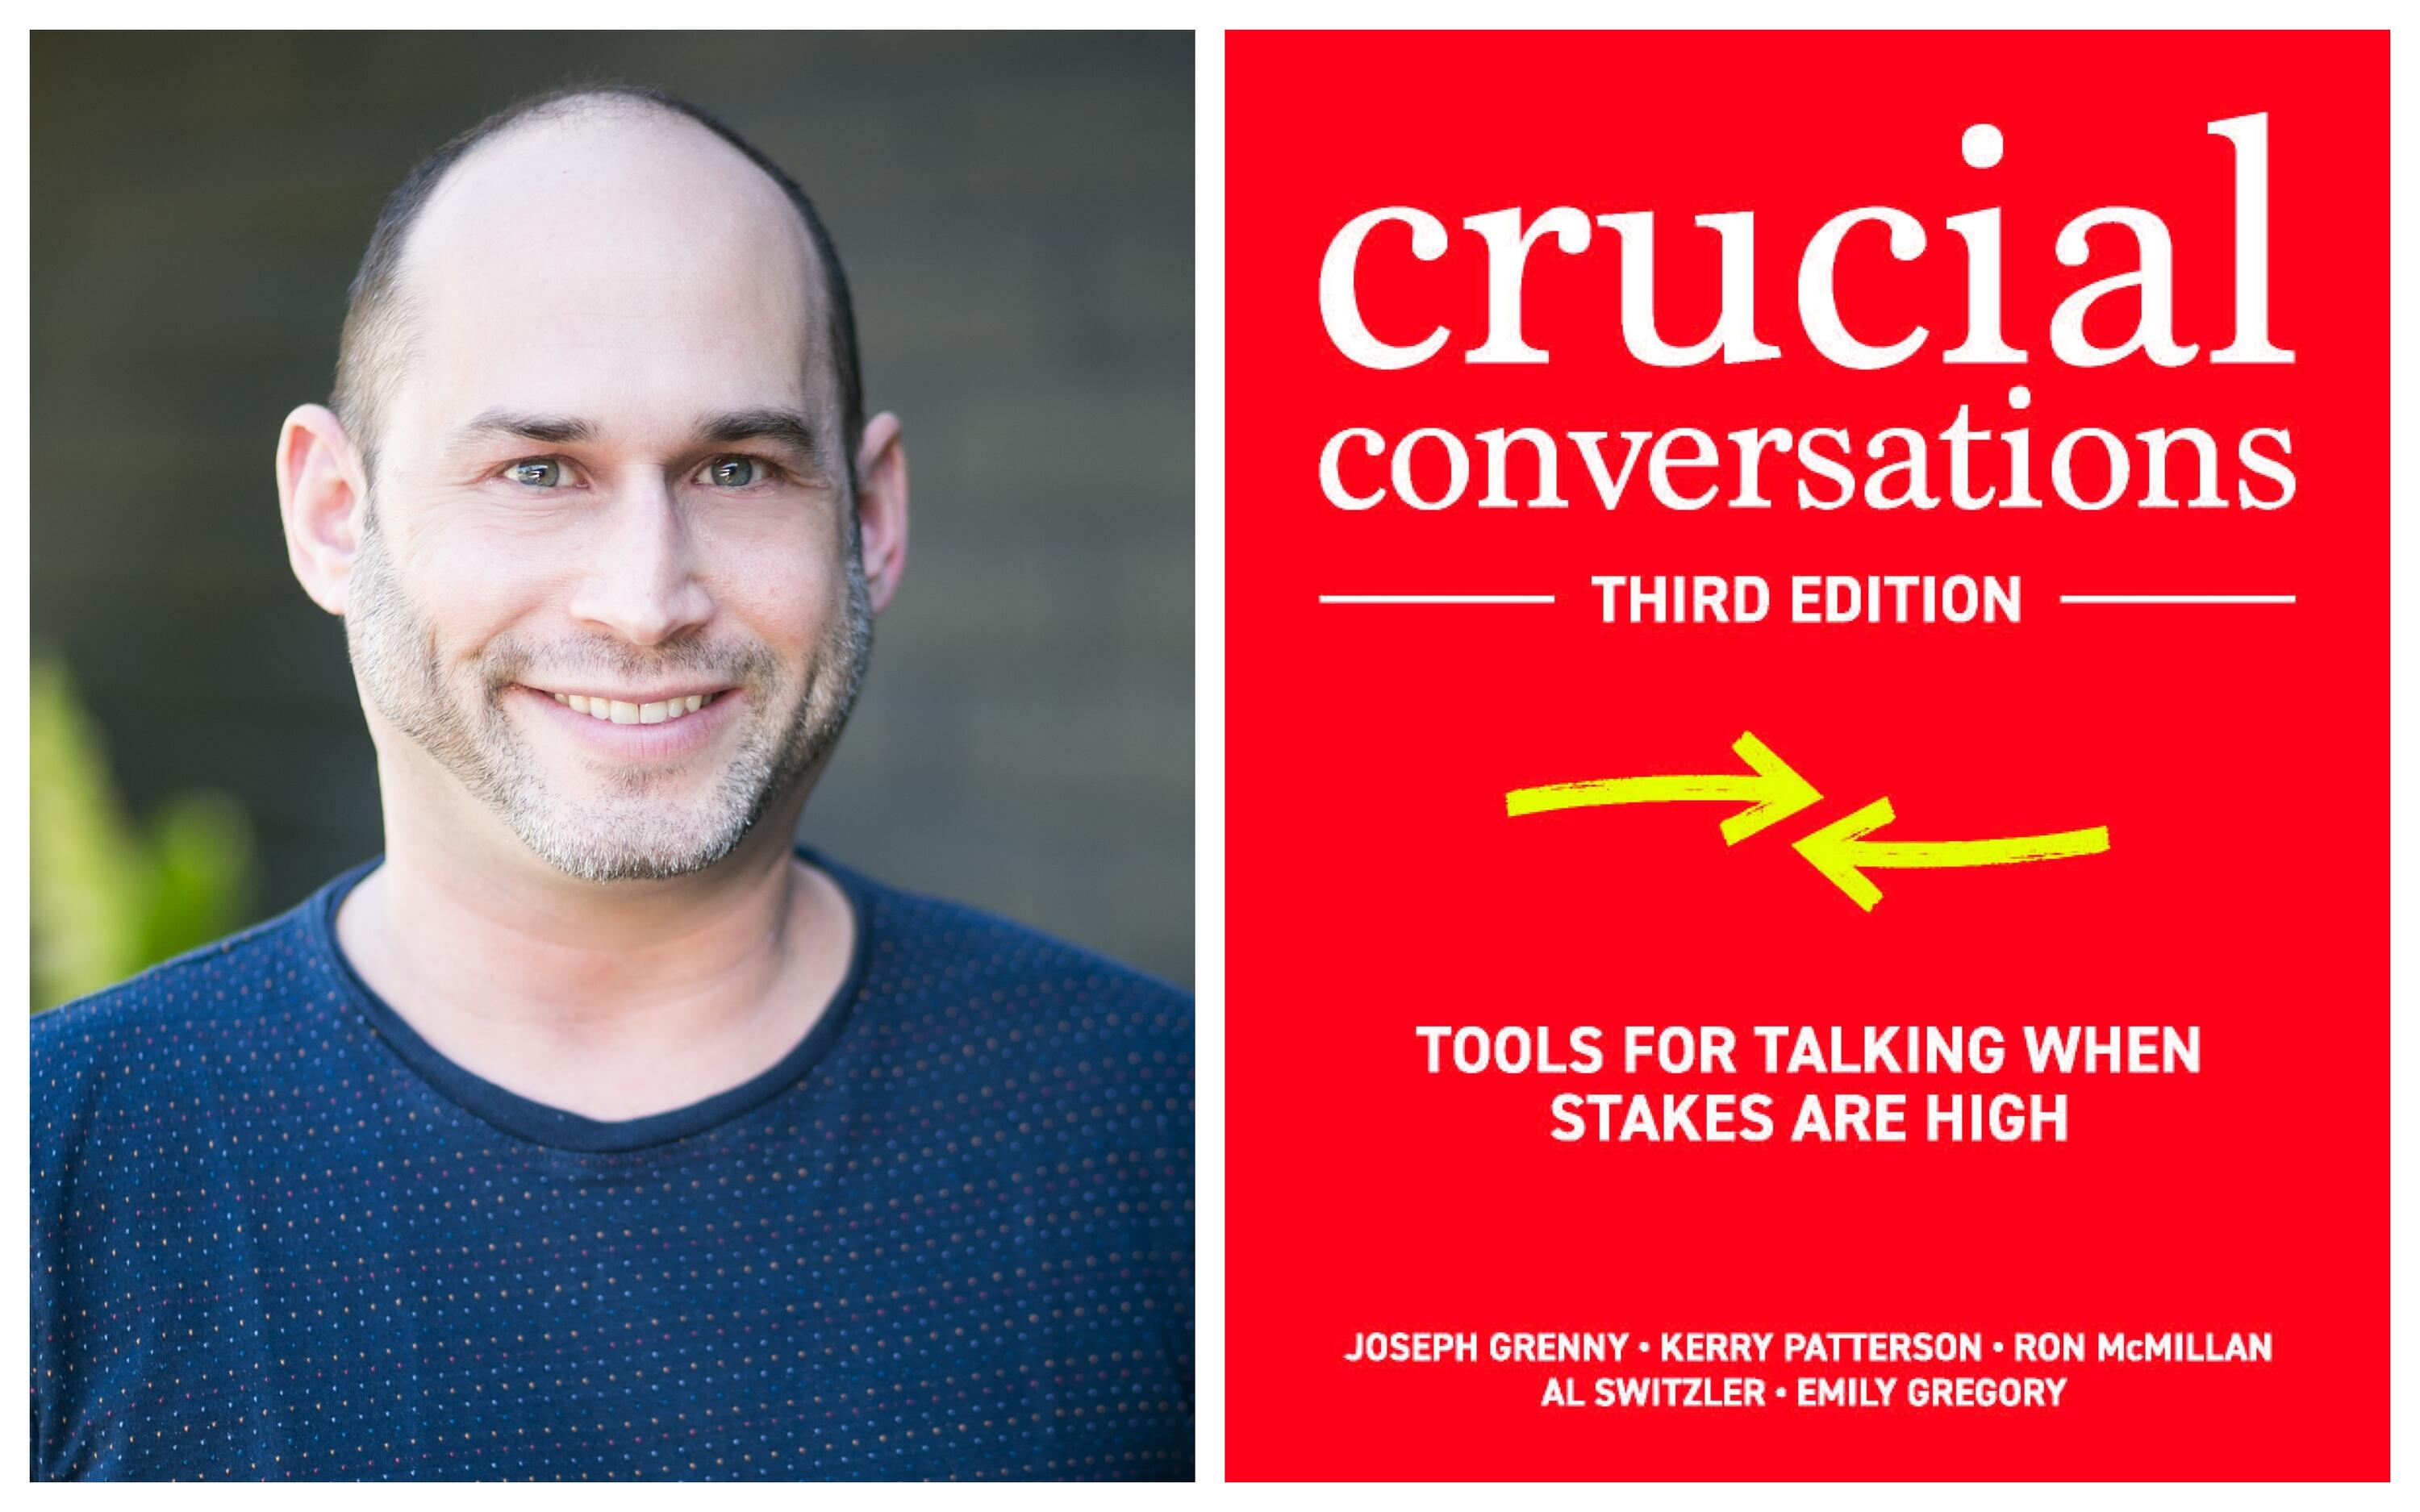 Crucial conversations tools for talking when stakes are high